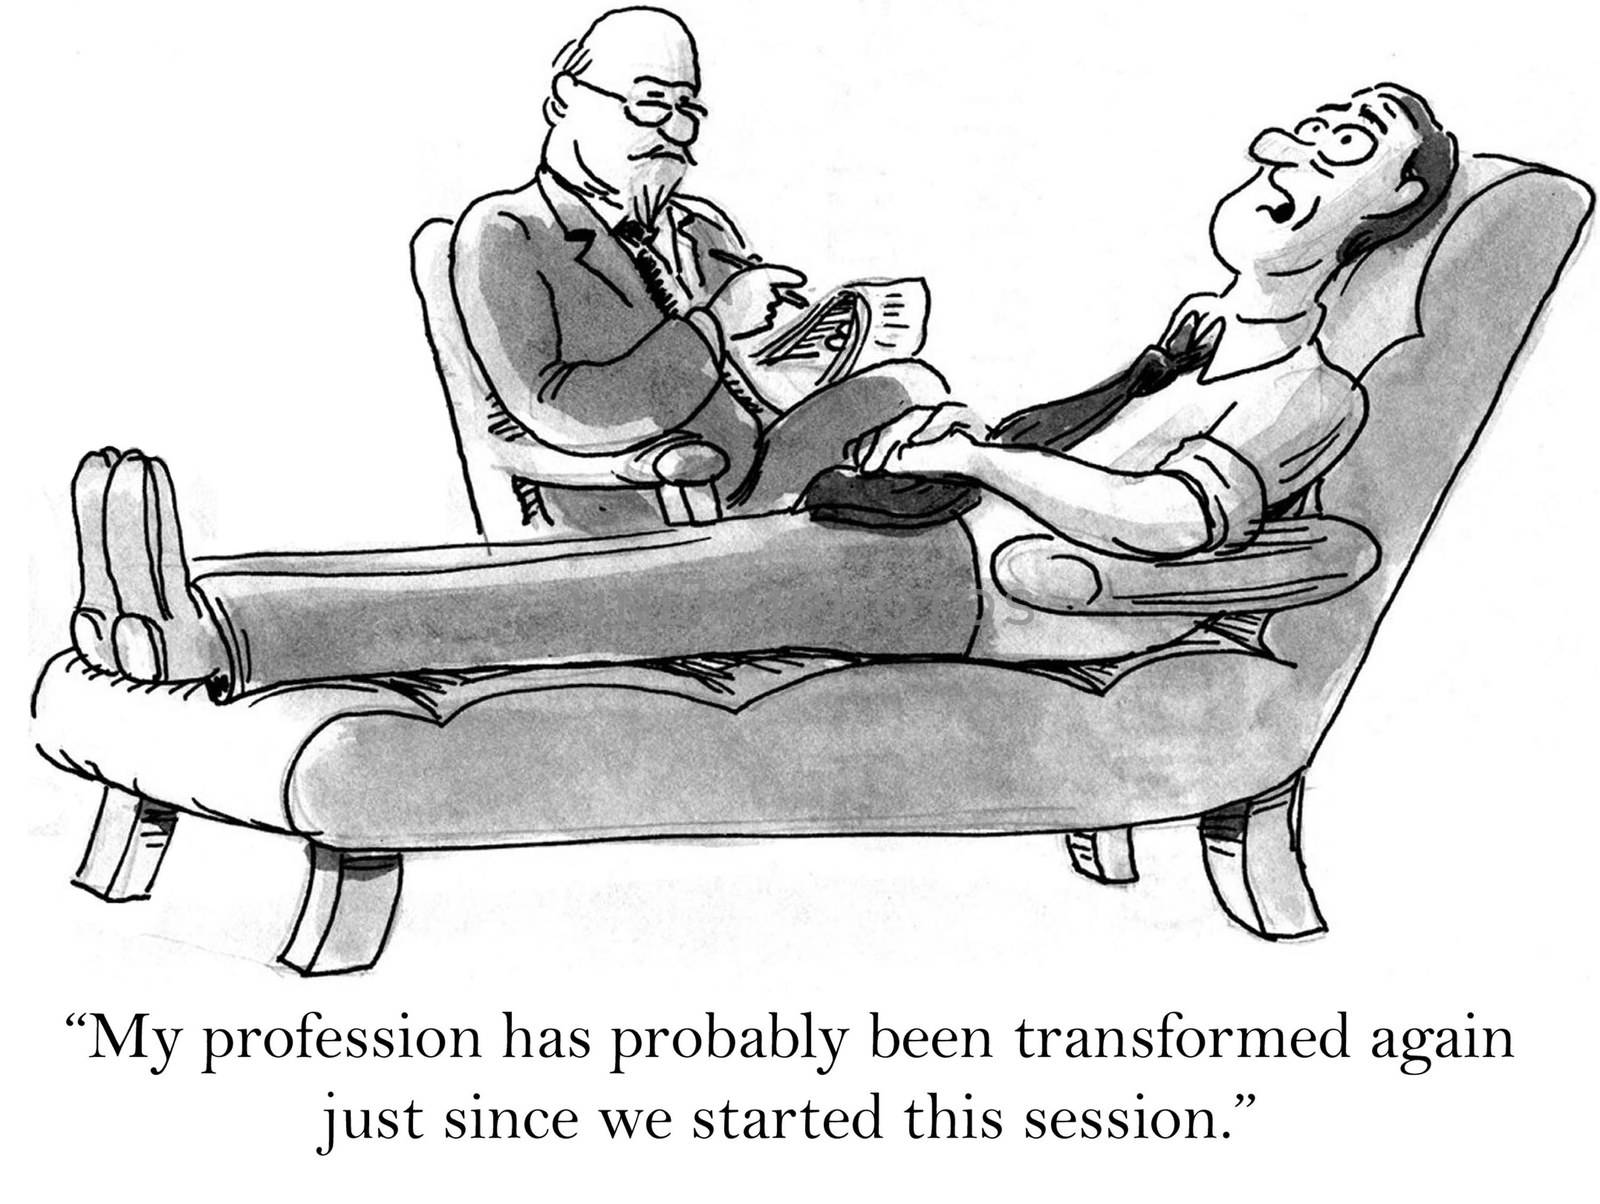 "My profession has probably been transformed again just since we started this session."